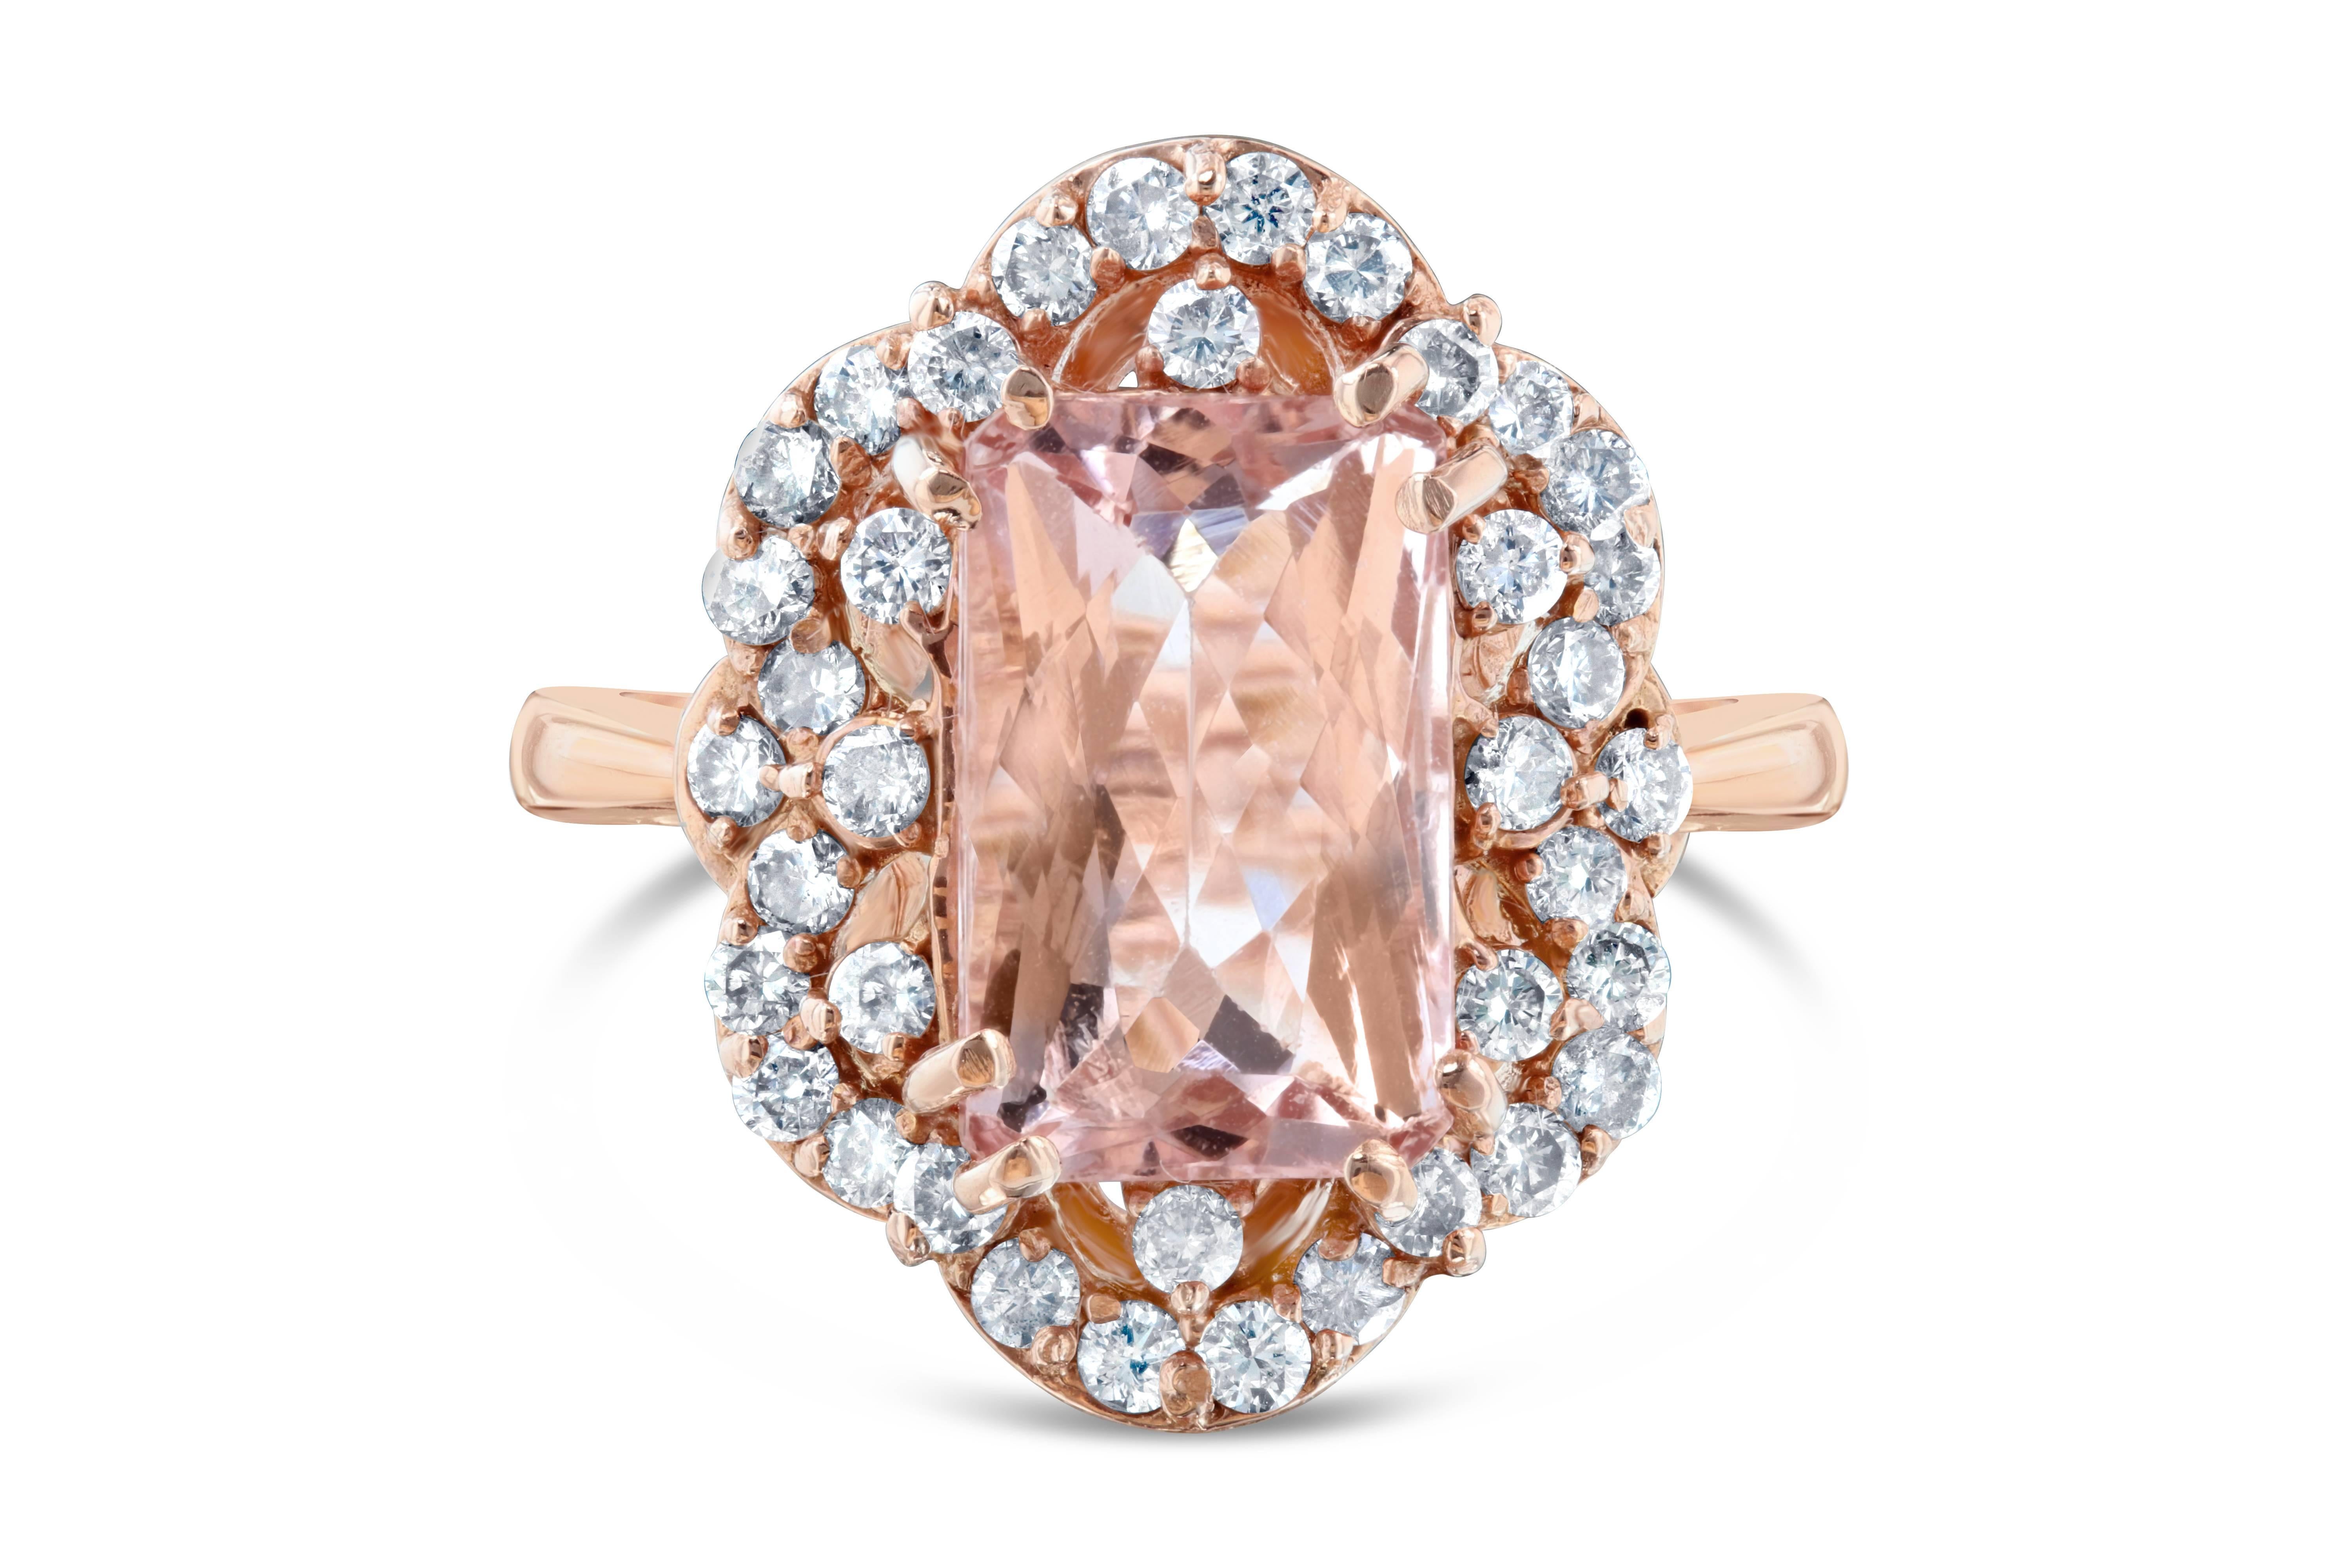 A gorgeous Victorian Inspired ring! This ring has a 3.93 carat Rectangular Cut Morganite in the center of the ring and is surrounded by 38 Round Brilliant Cut Diamonds that weigh 0.87 carat. The ring is casted in 14K Rose Gold and weighs